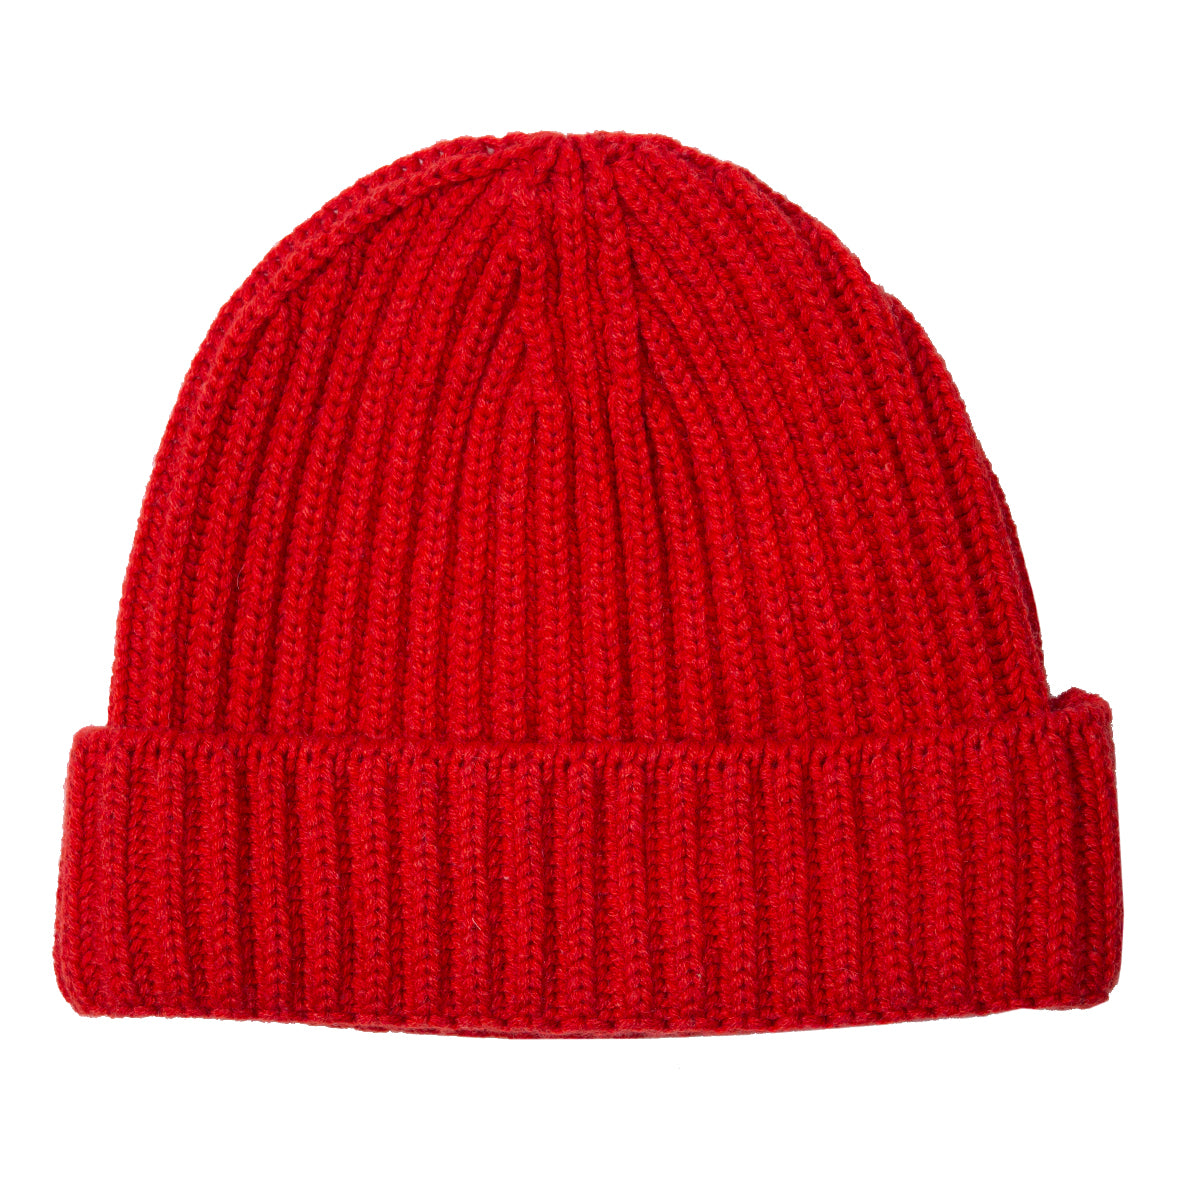 Fisherman Knit 8ply Cashmere Hat - Vreeland Red  Robert Old Vreeland ONE 